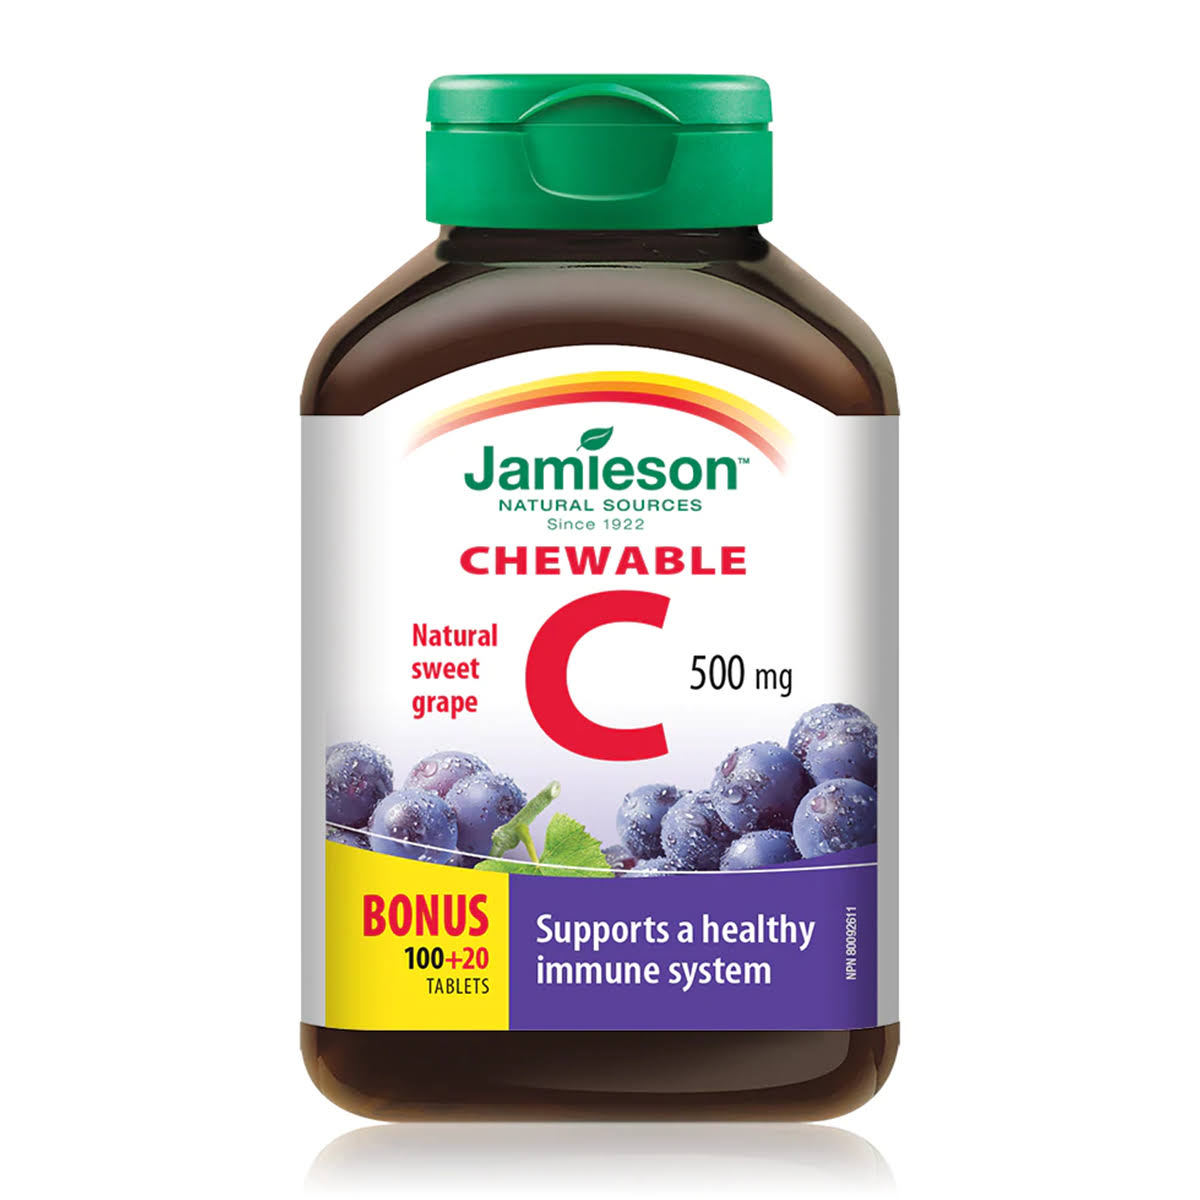 Jamieson Vitamin C Chewable Formula Supplement - 500mg, Grapes, 120 Tablets